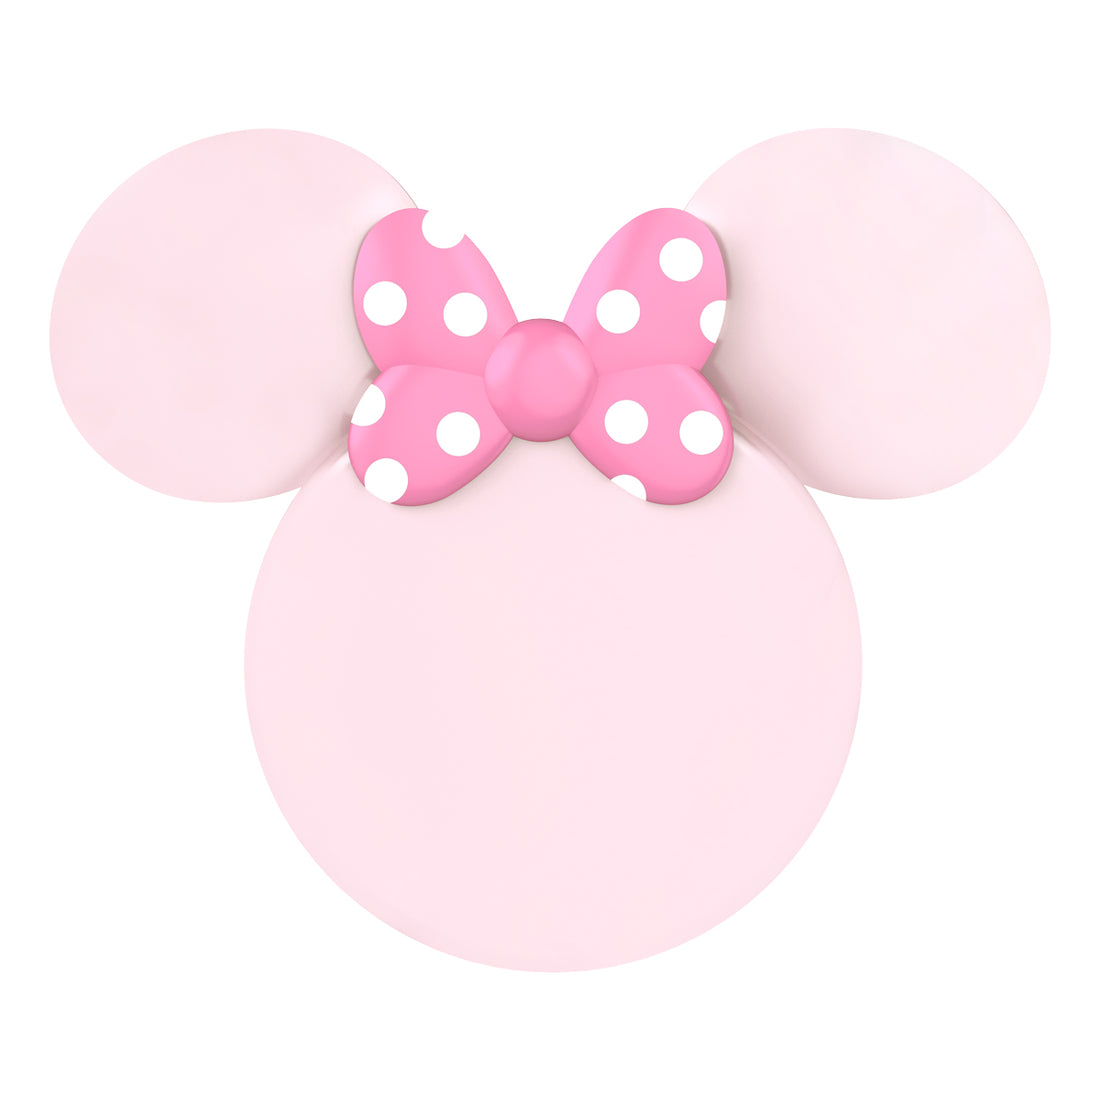 Minnie Mouse Bowtiful LED Compact Mirror